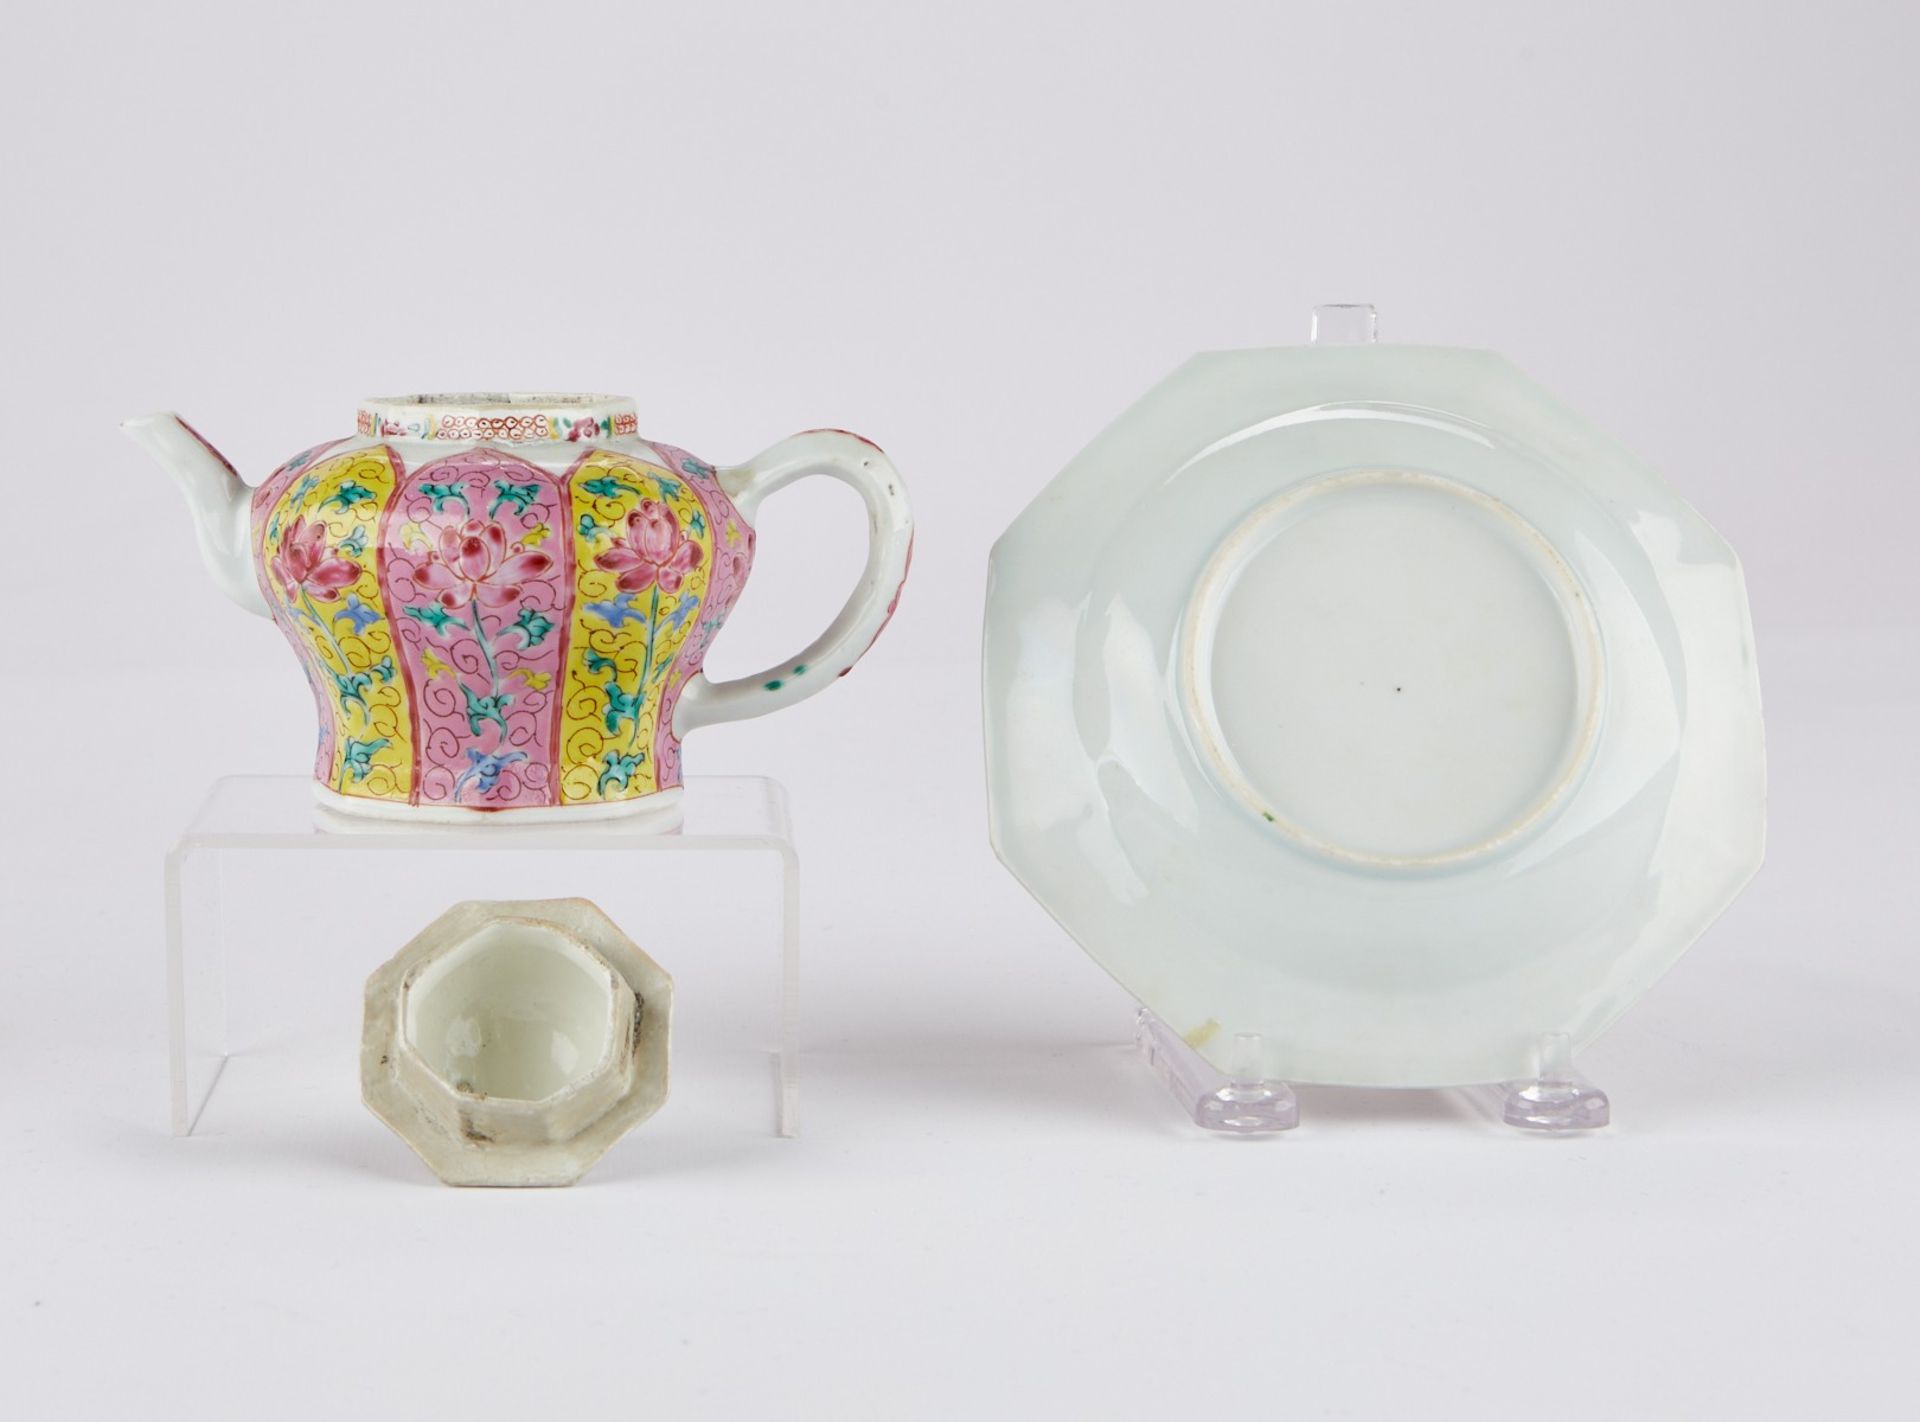 18th c. Chinese Export Porcelain Teapot and Undertray - Image 2 of 7